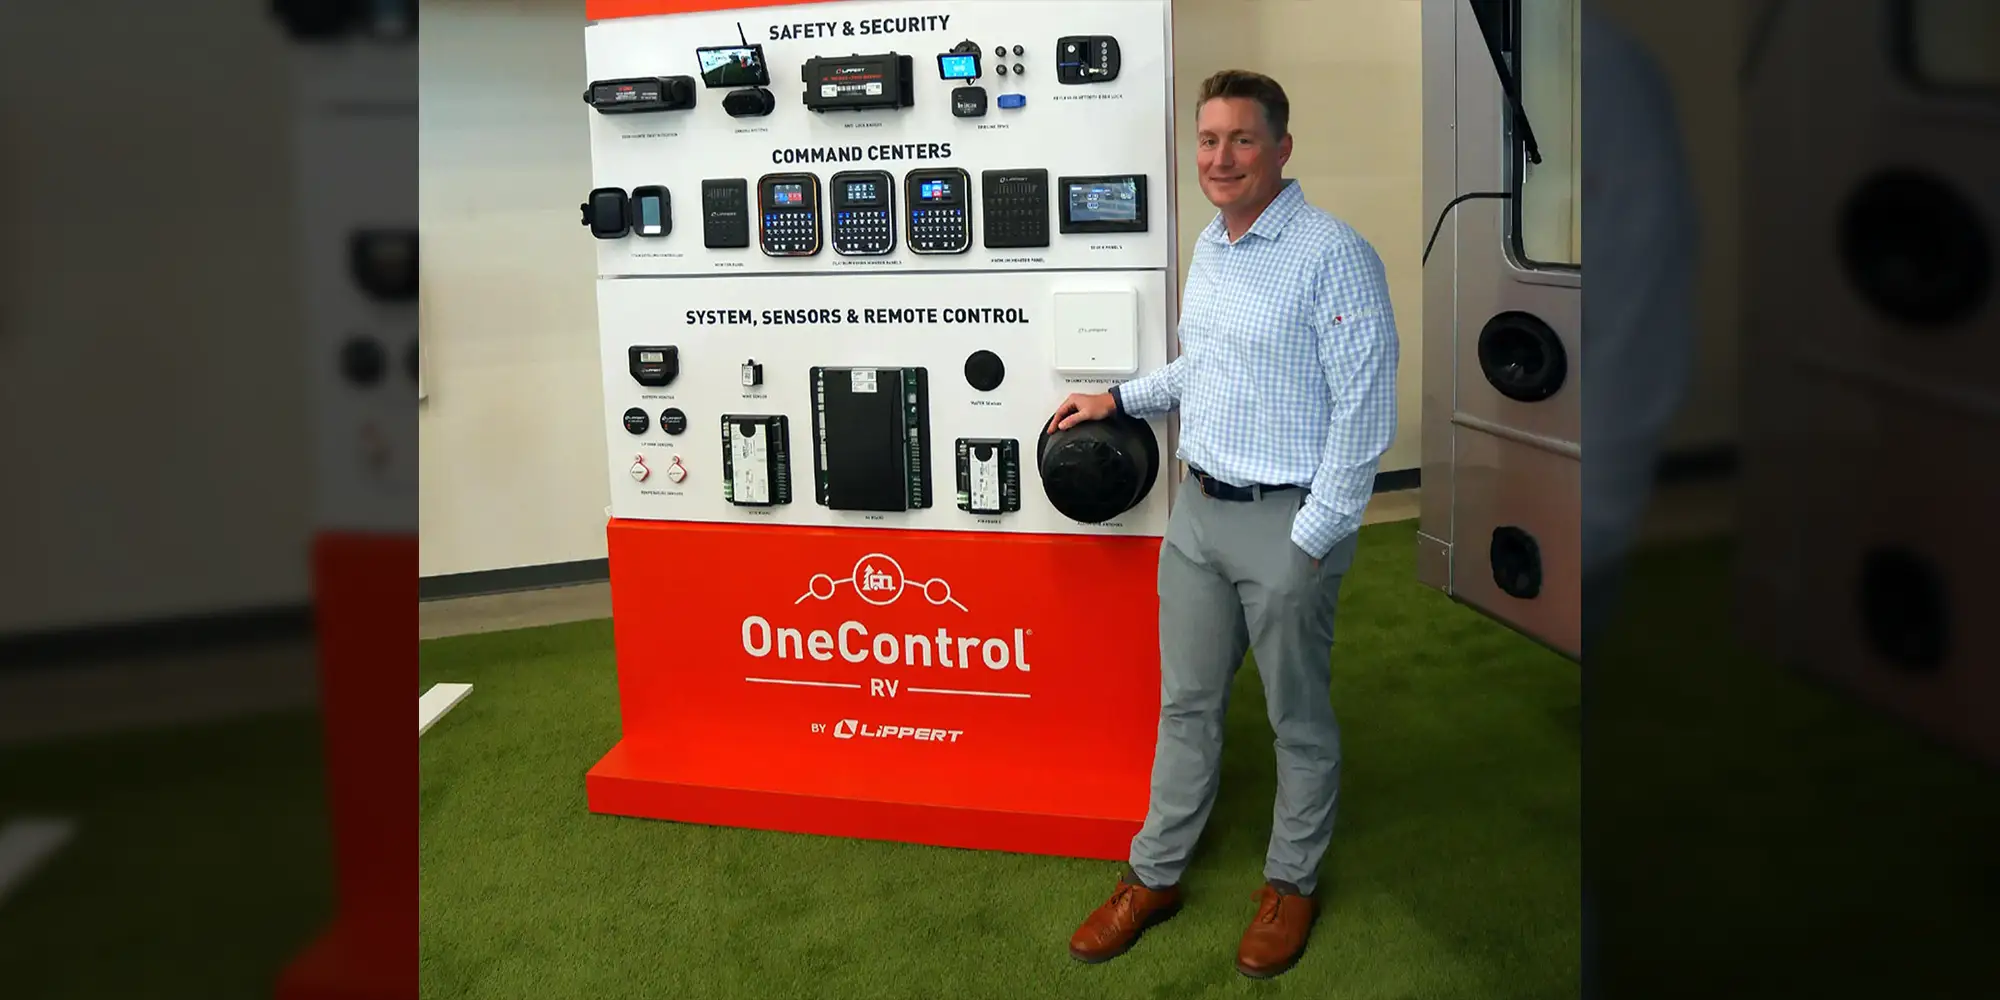 Jarod Lippert wearing a light blue plaid button up shirt and slacks smiles while standing alongside a OneControl display showing the wealth of functions the device now controls